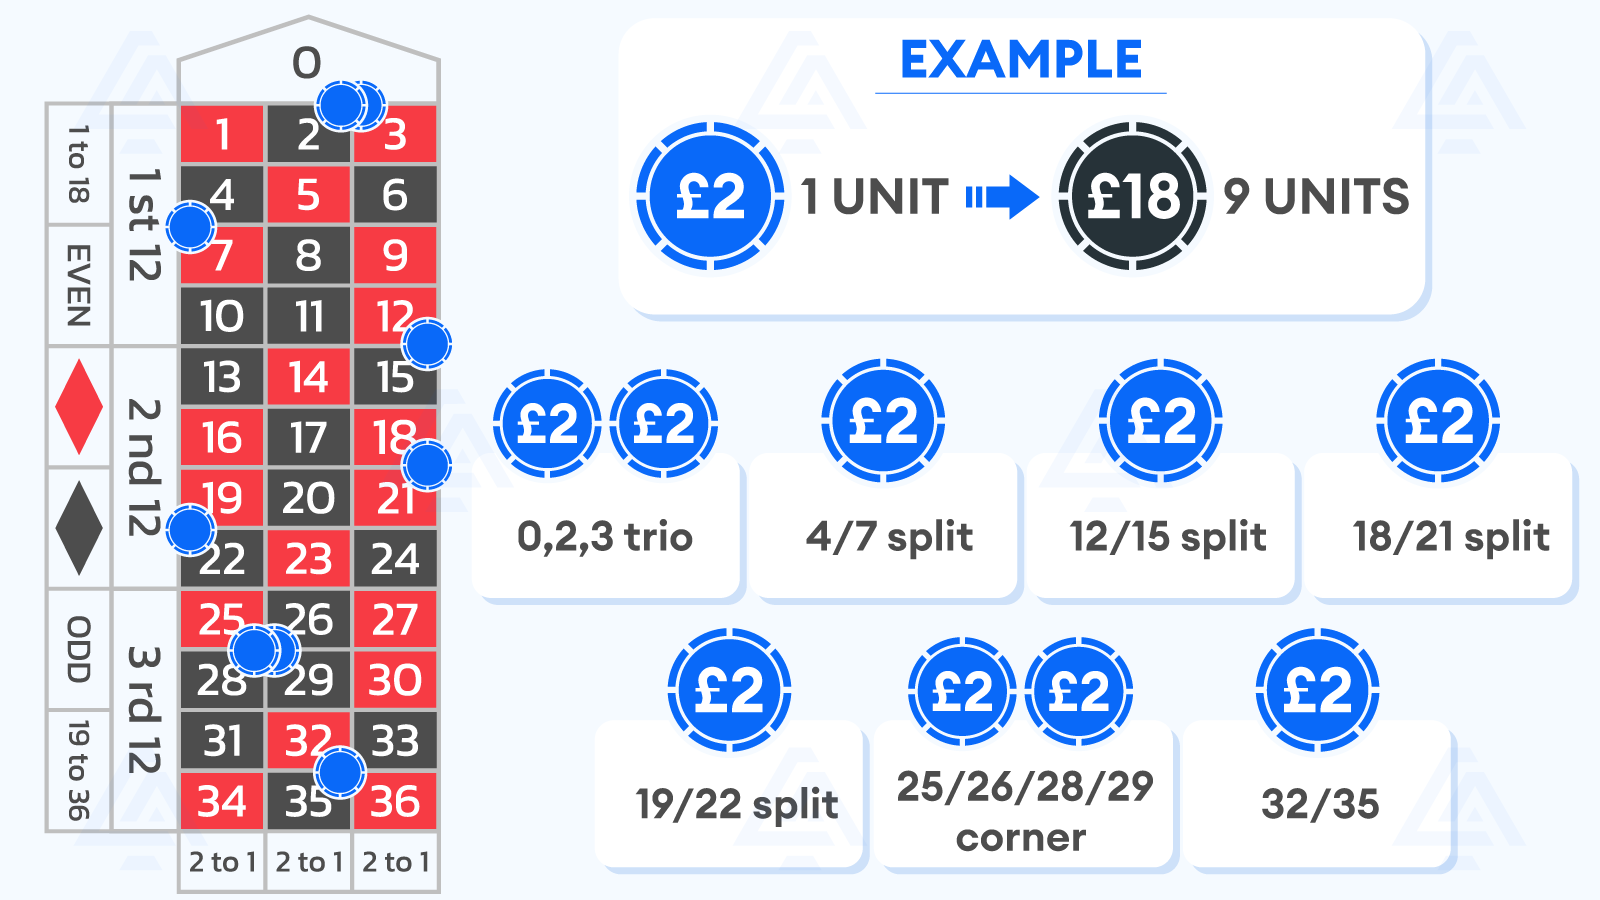 Voisins roulette betting example